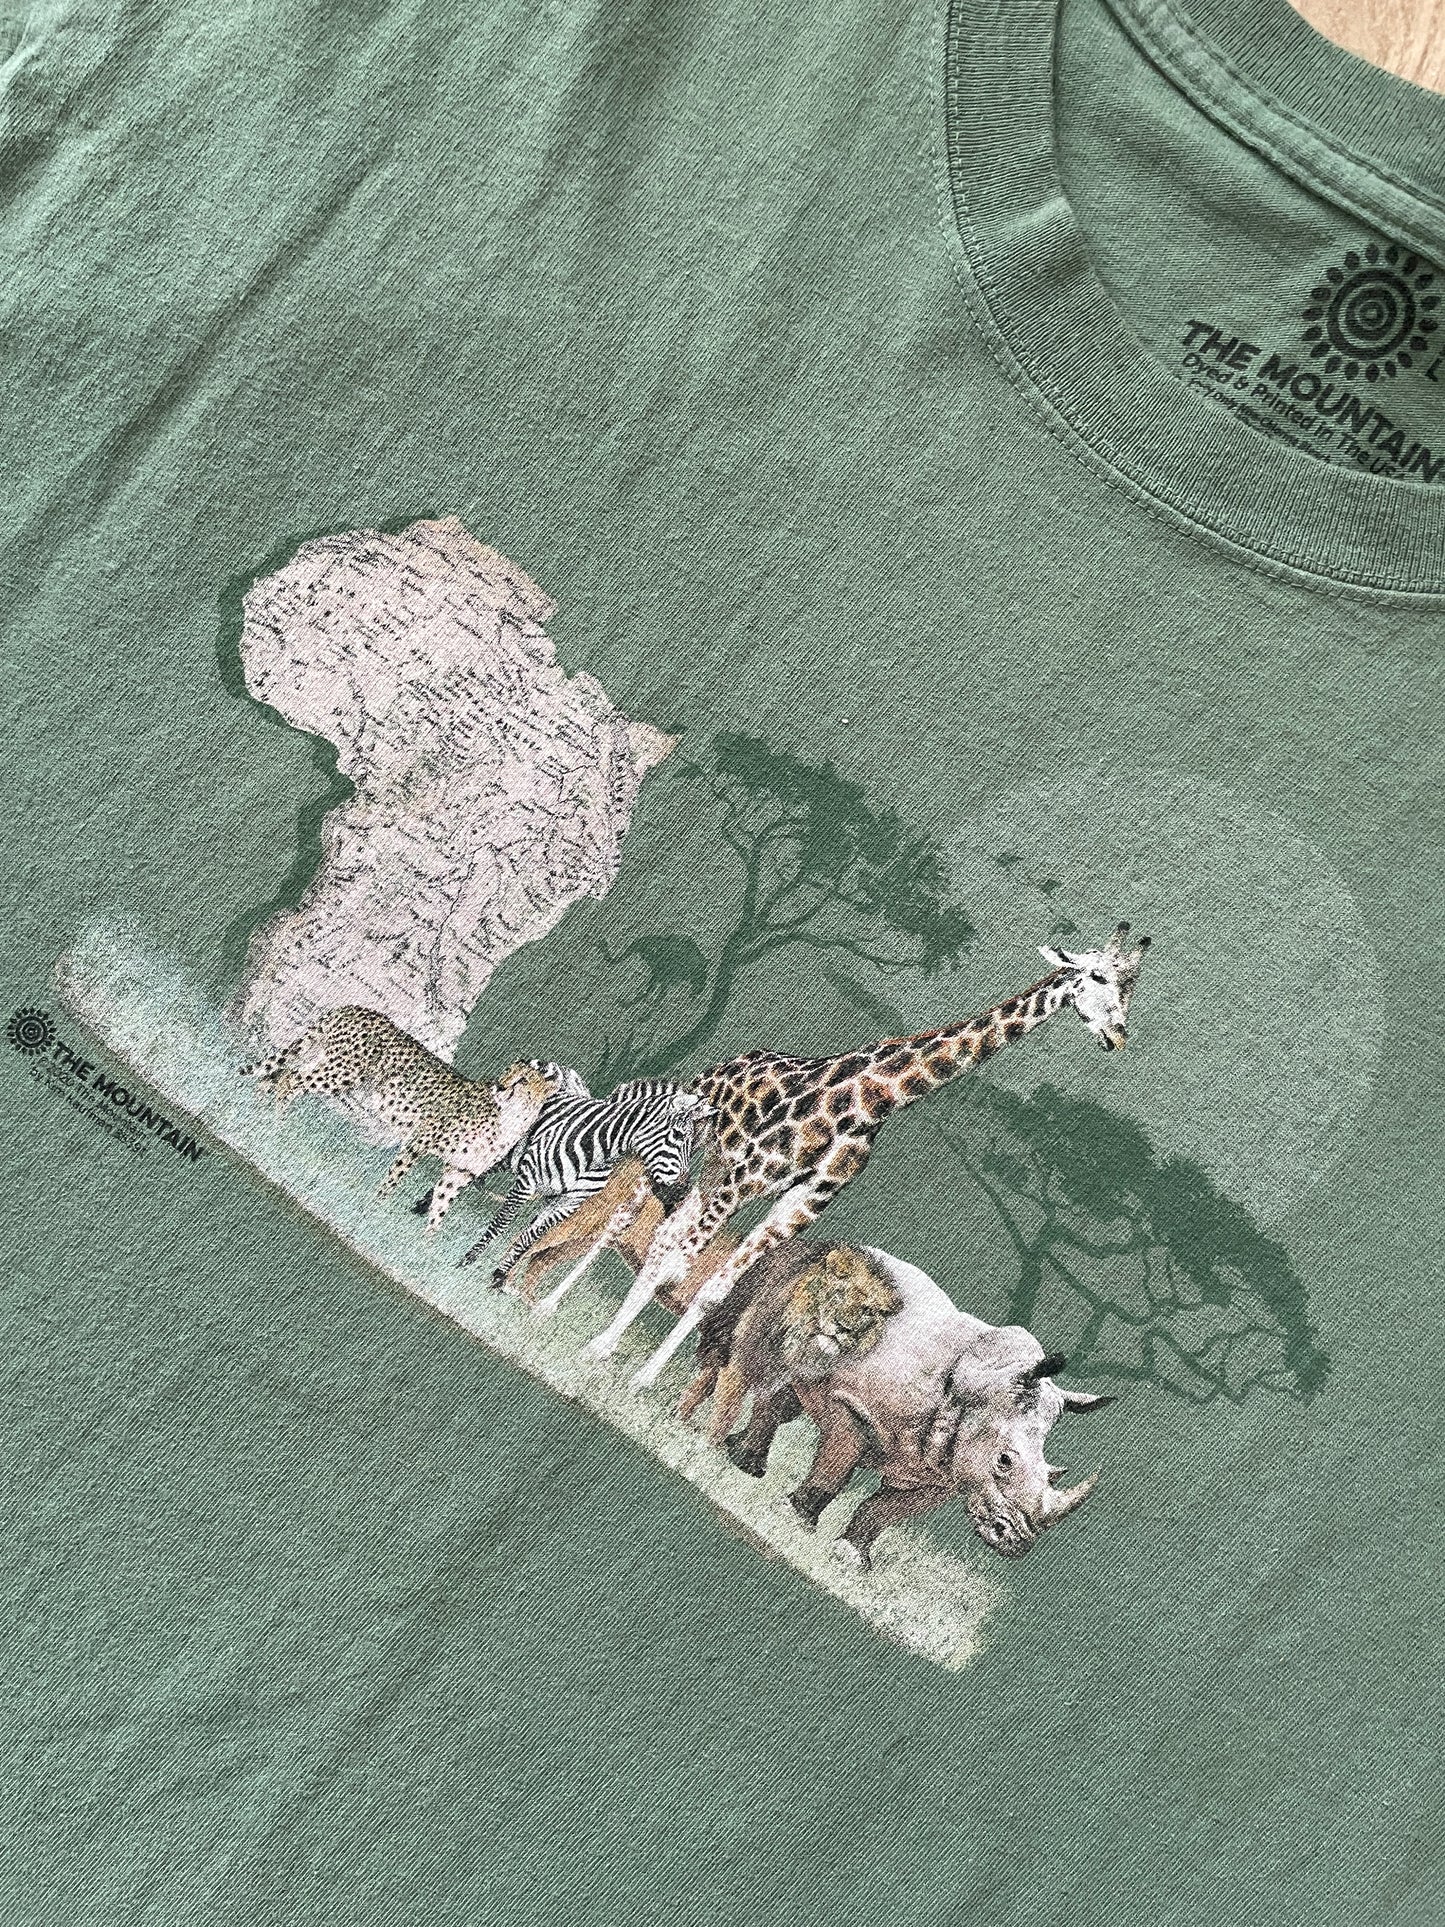 Large Men's Olive Green African Wildlife Short Sleeve T-Shirt | READY TO TIE DYE